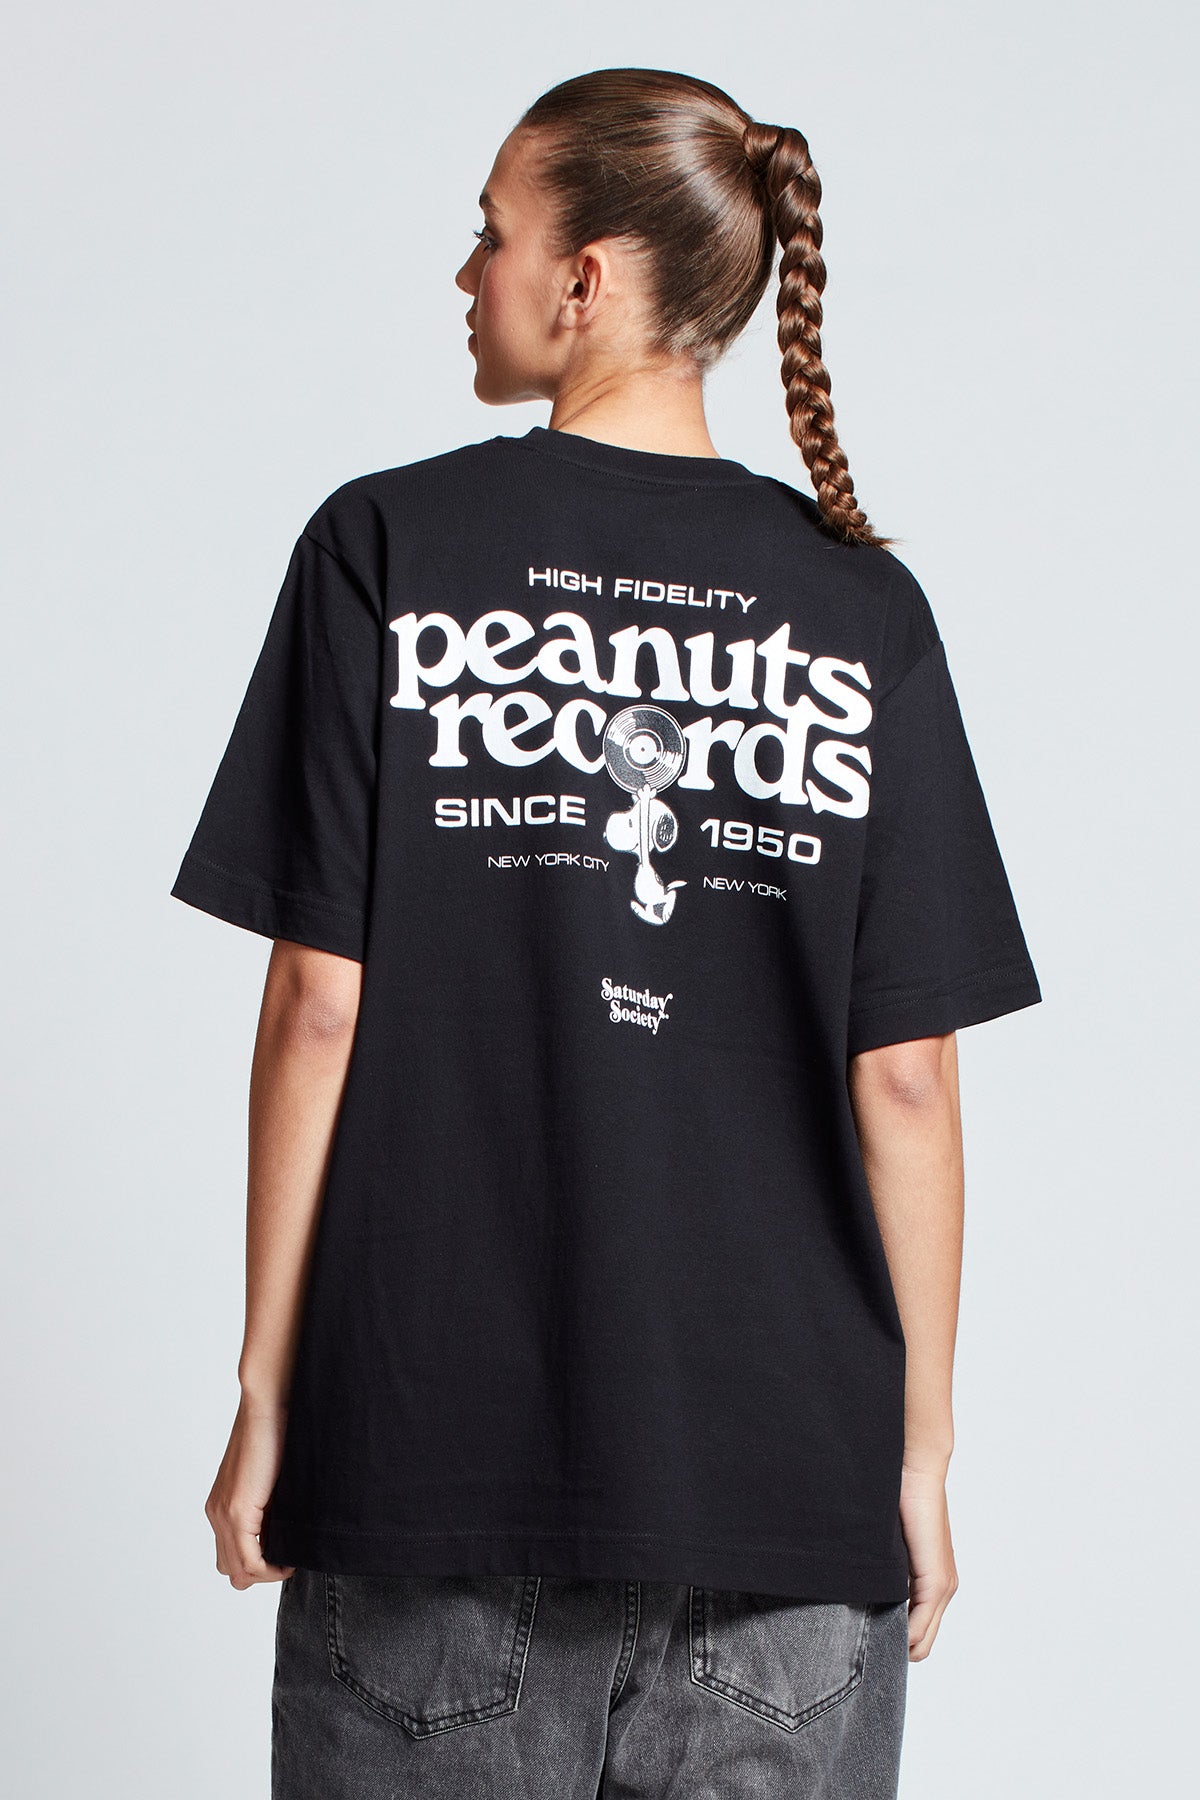 Snoopy Peanuts Records T-shirt in Black